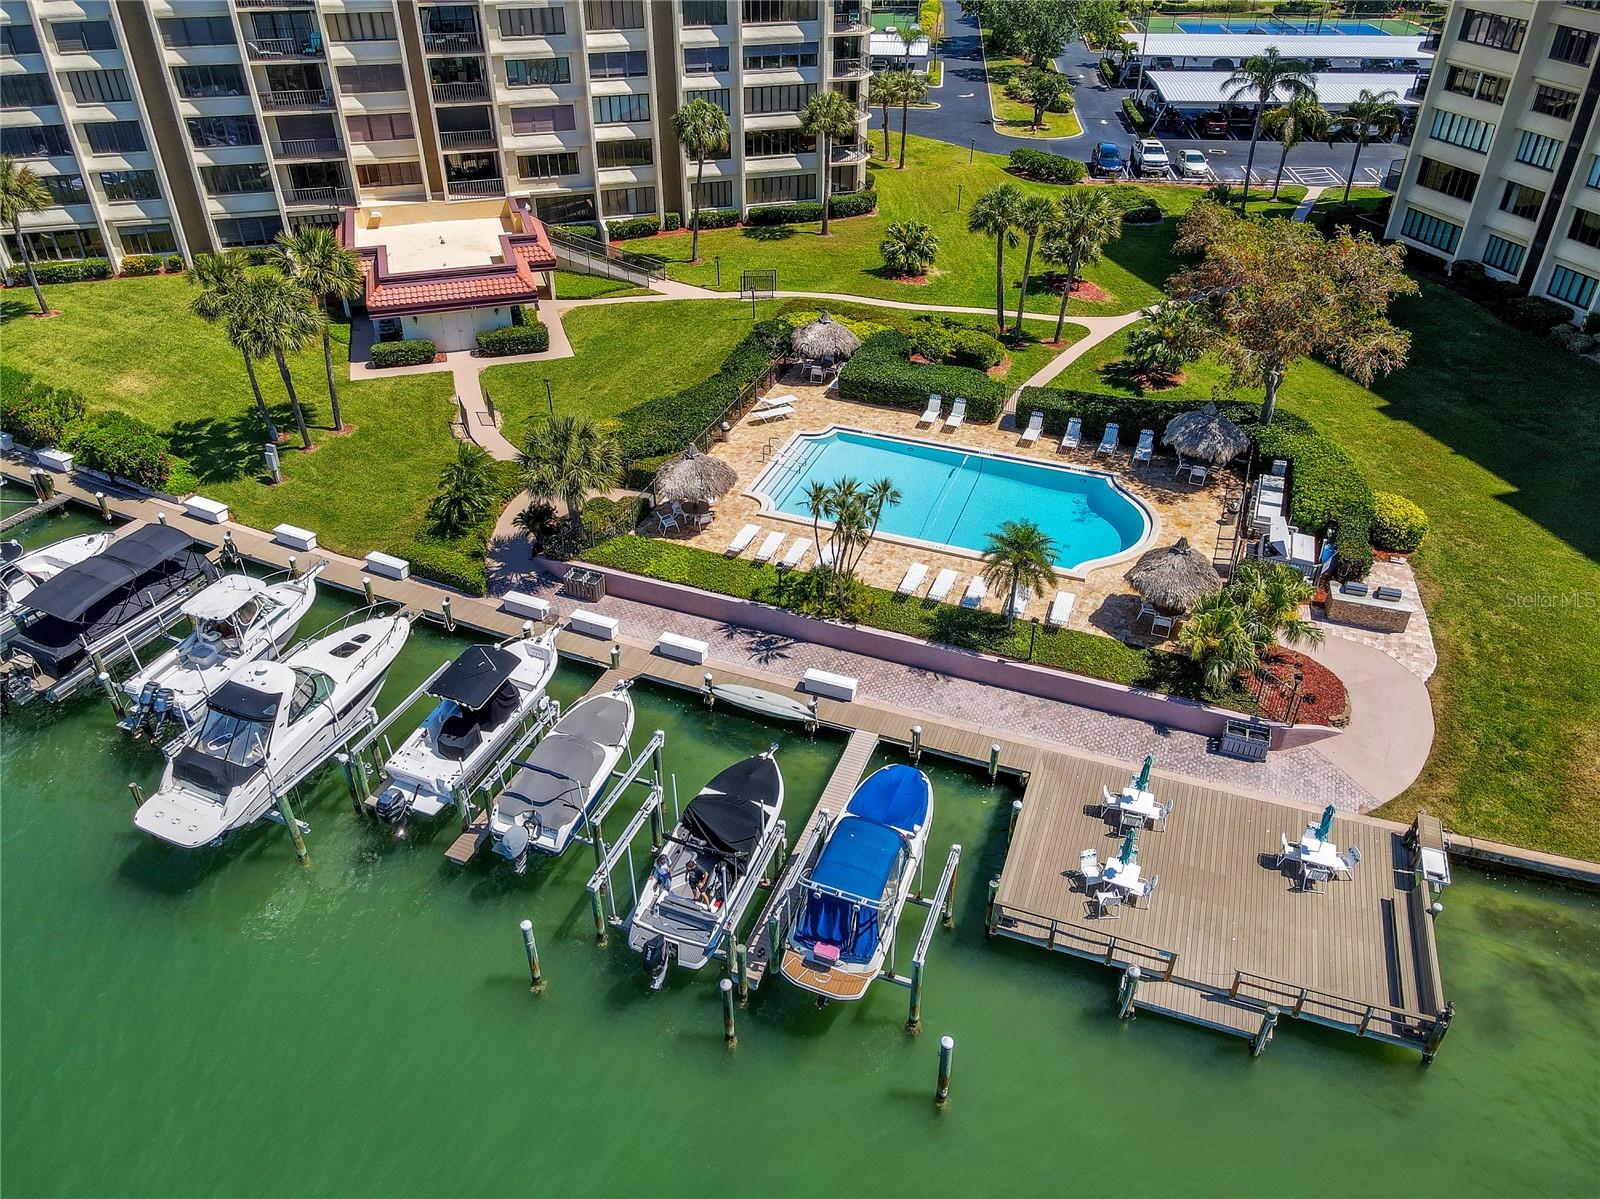 Beautiful waterfront condo building with tennis courts, heated waterfront pool, covered parking, and boat slips available for purchase when they become available.